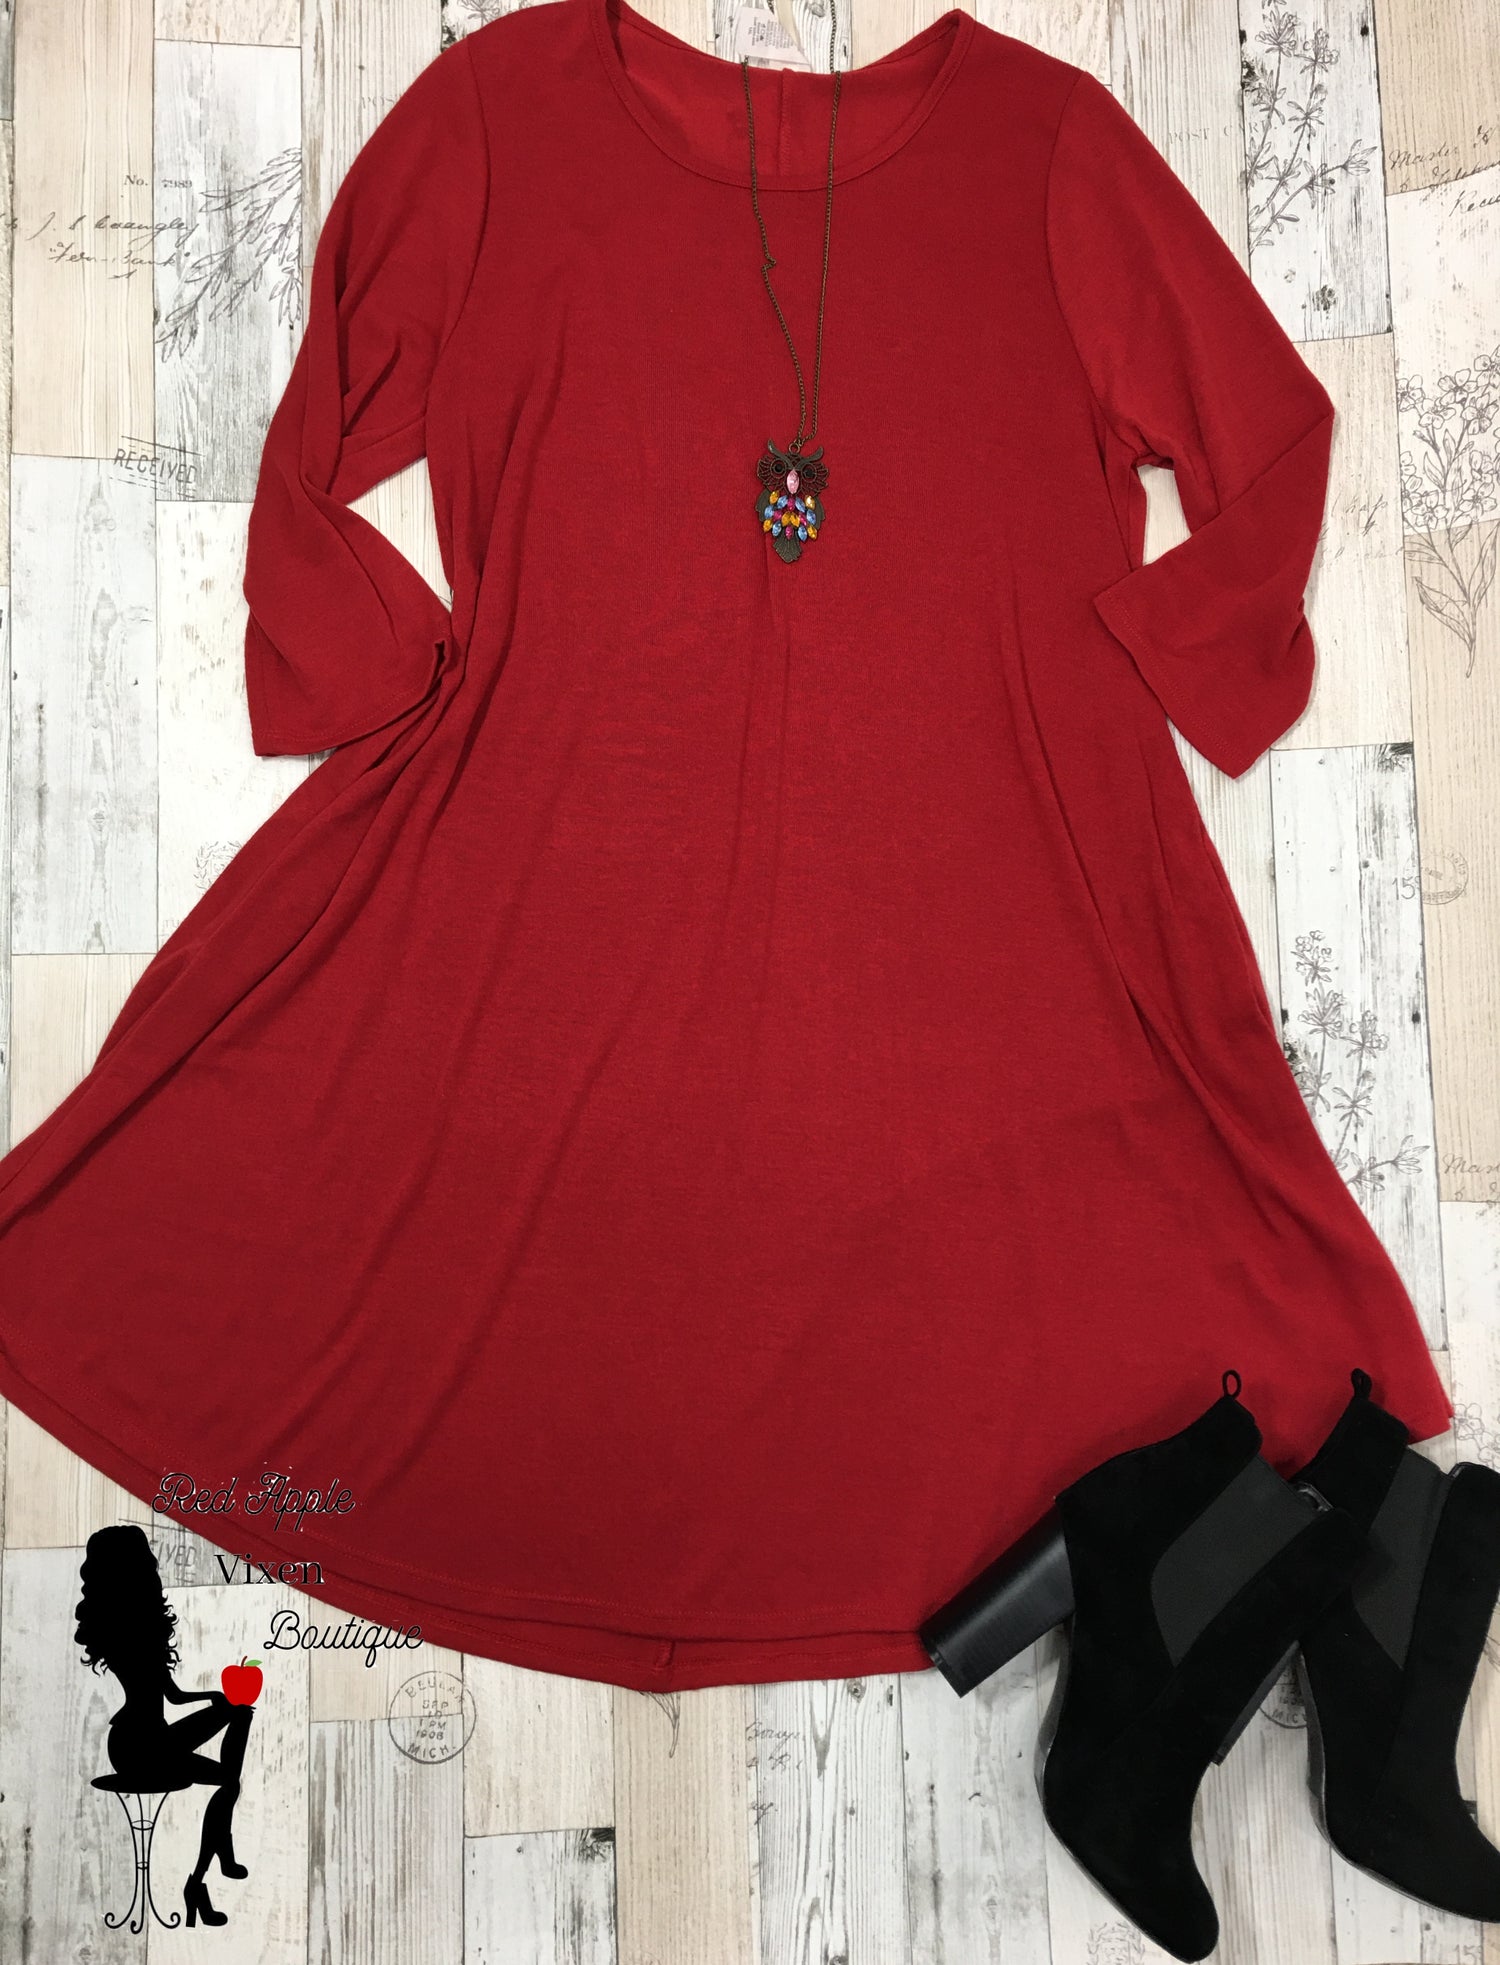 Solid Red Knit A-Line Dress - Red Apple Vixen Boutique